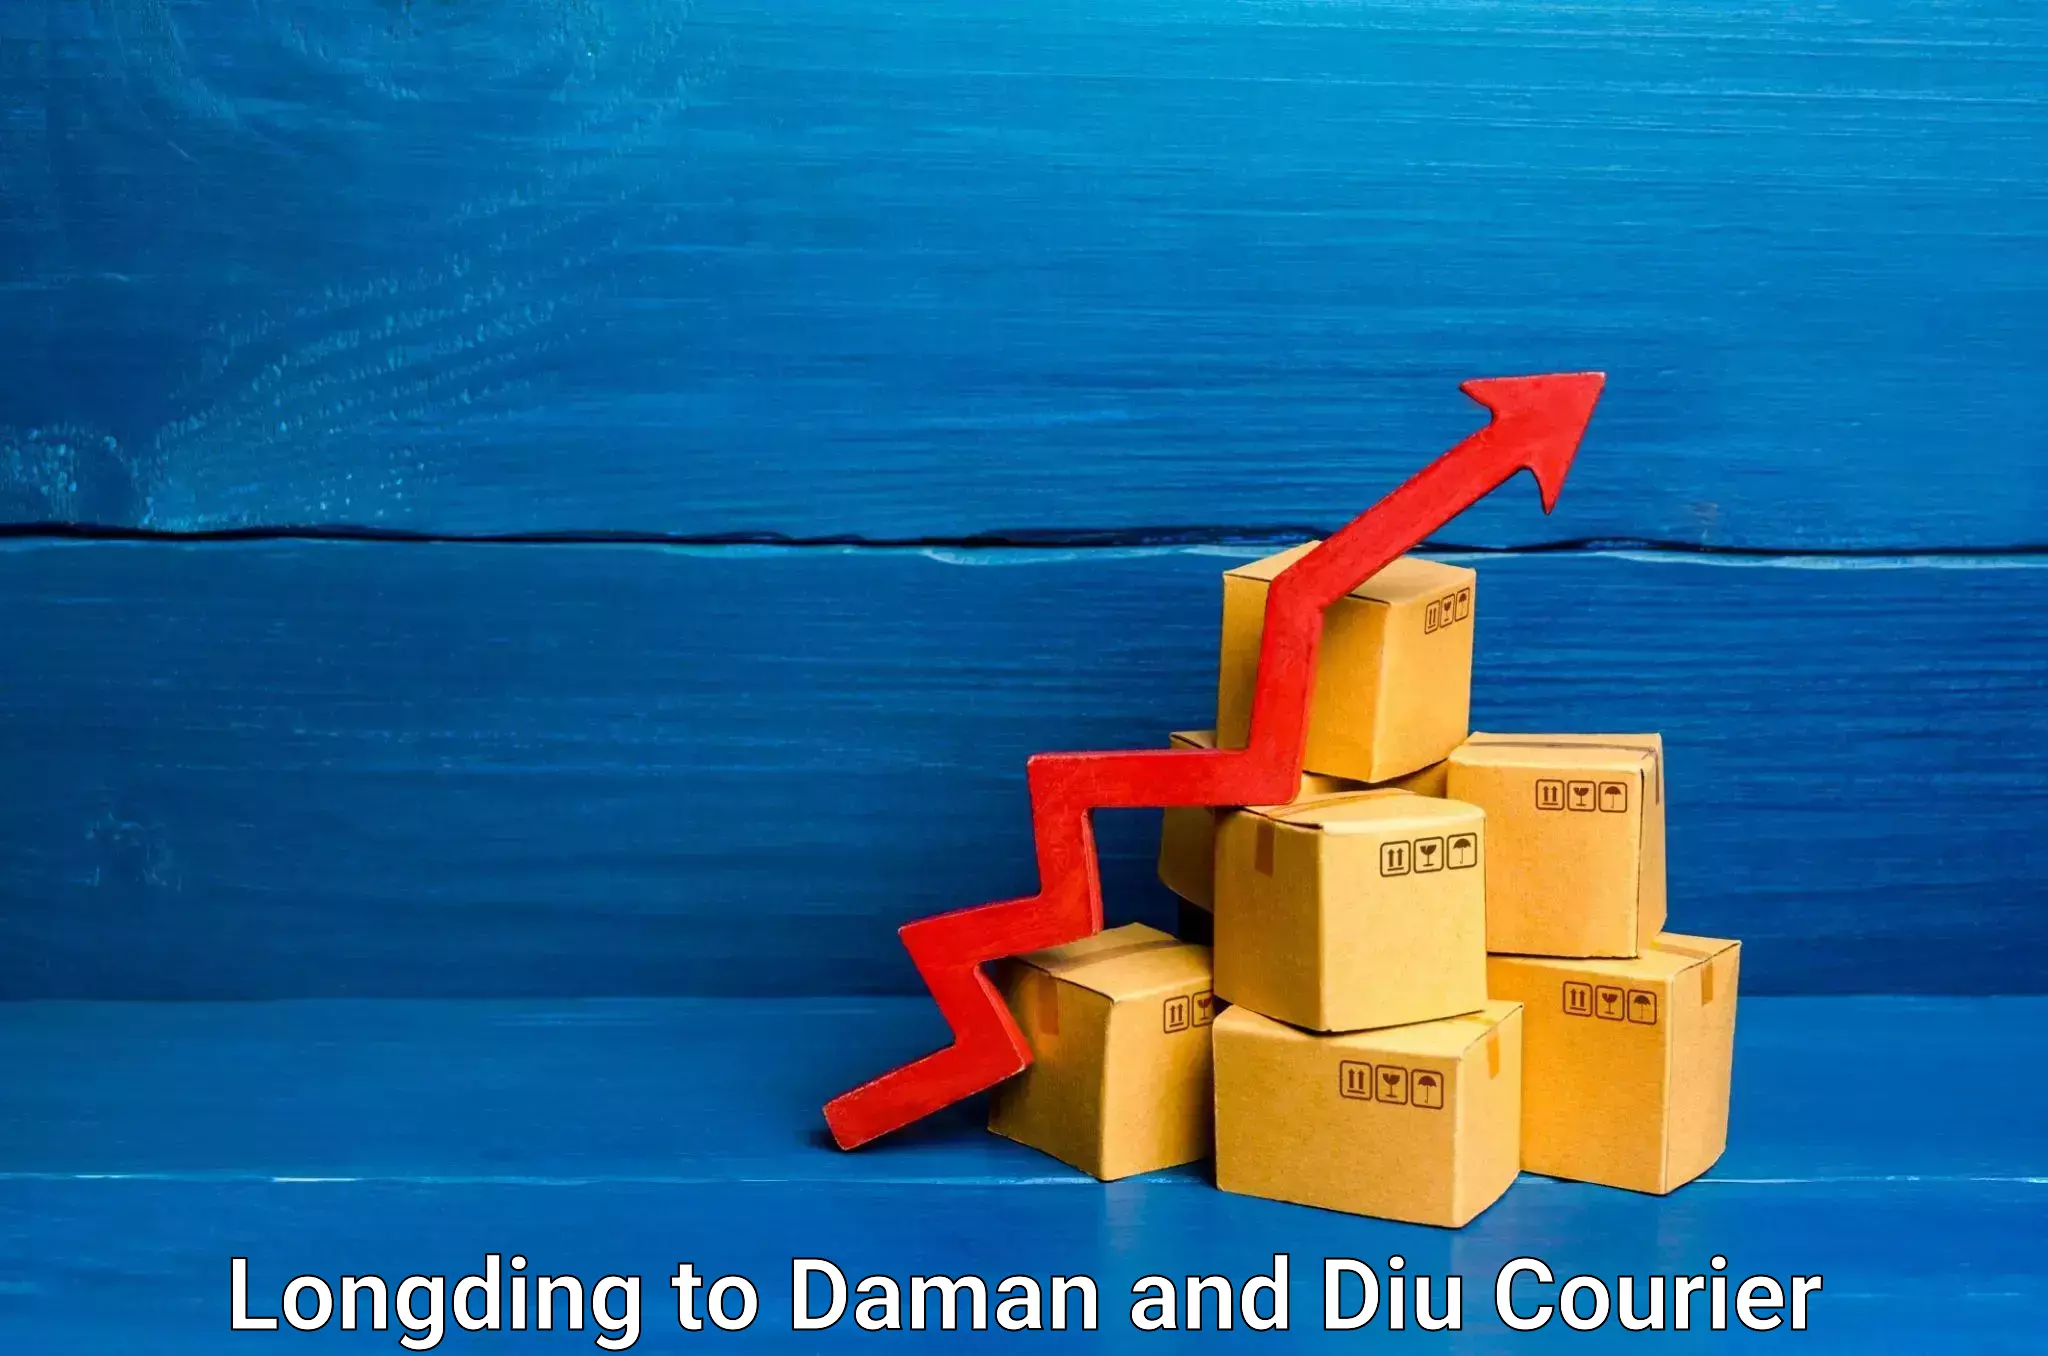 Parcel service for businesses Longding to Diu